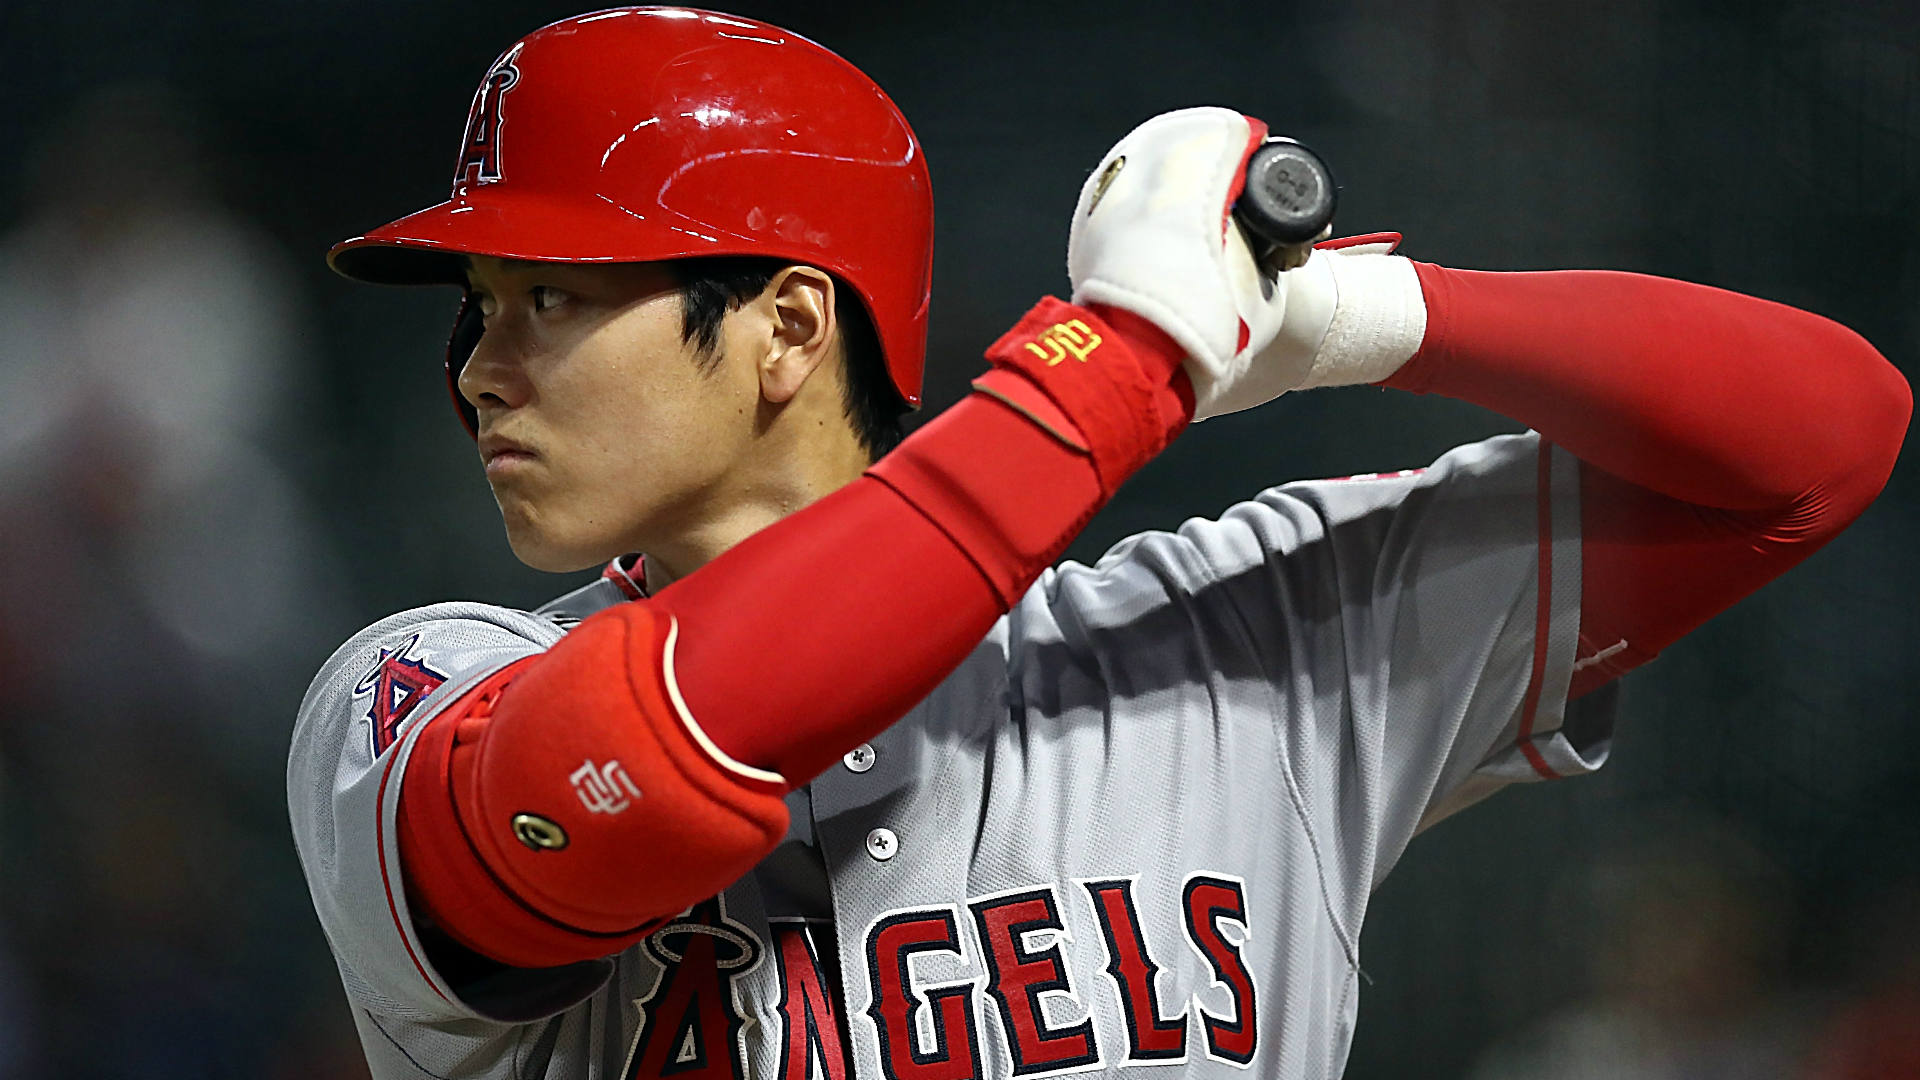 The Shohei Ohtani experience will get bigger, better as spotlight grows